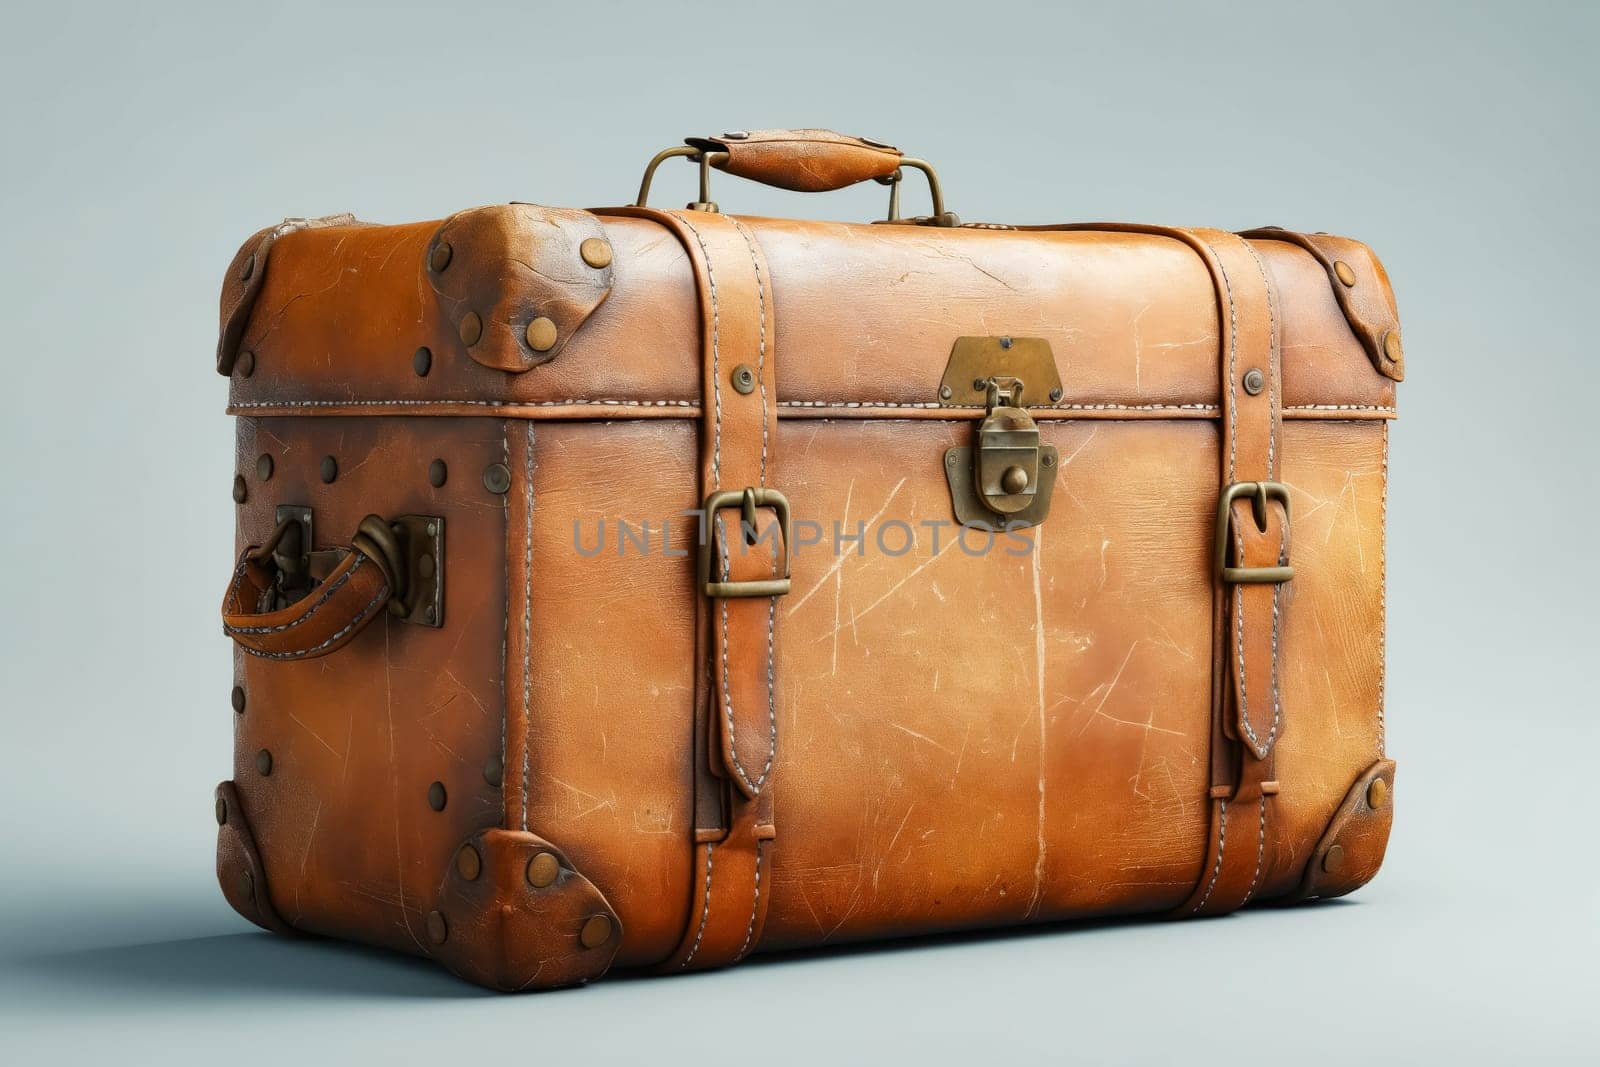 A brown leather suitcase with a gold buckle. The suitcase is old and worn, with a vintage look. Generative AI